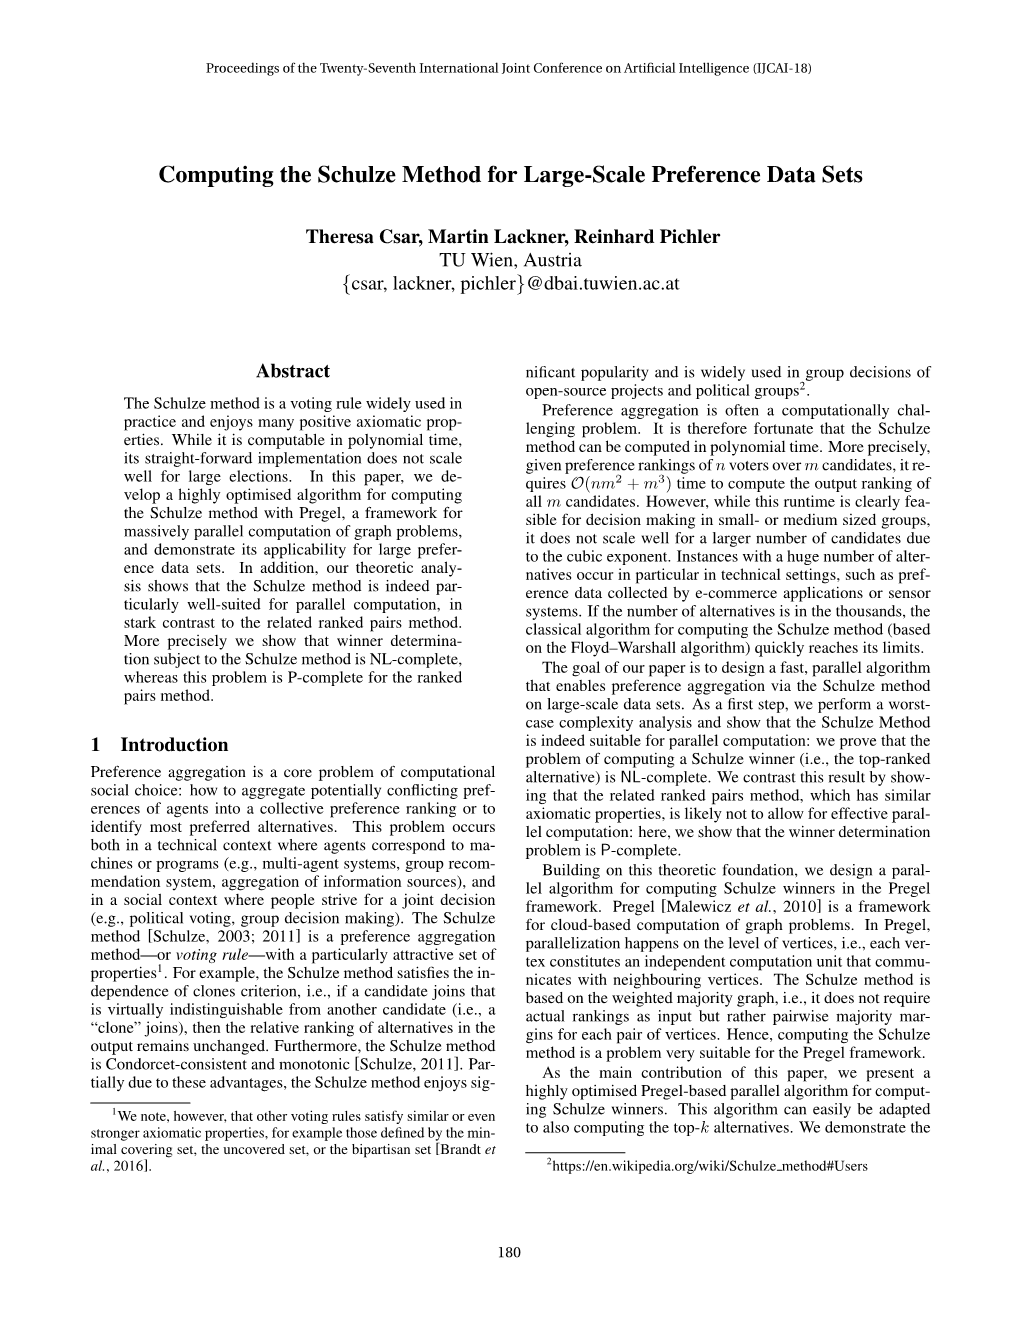 Computing the Schulze Method for Large-Scale Preference Data Sets